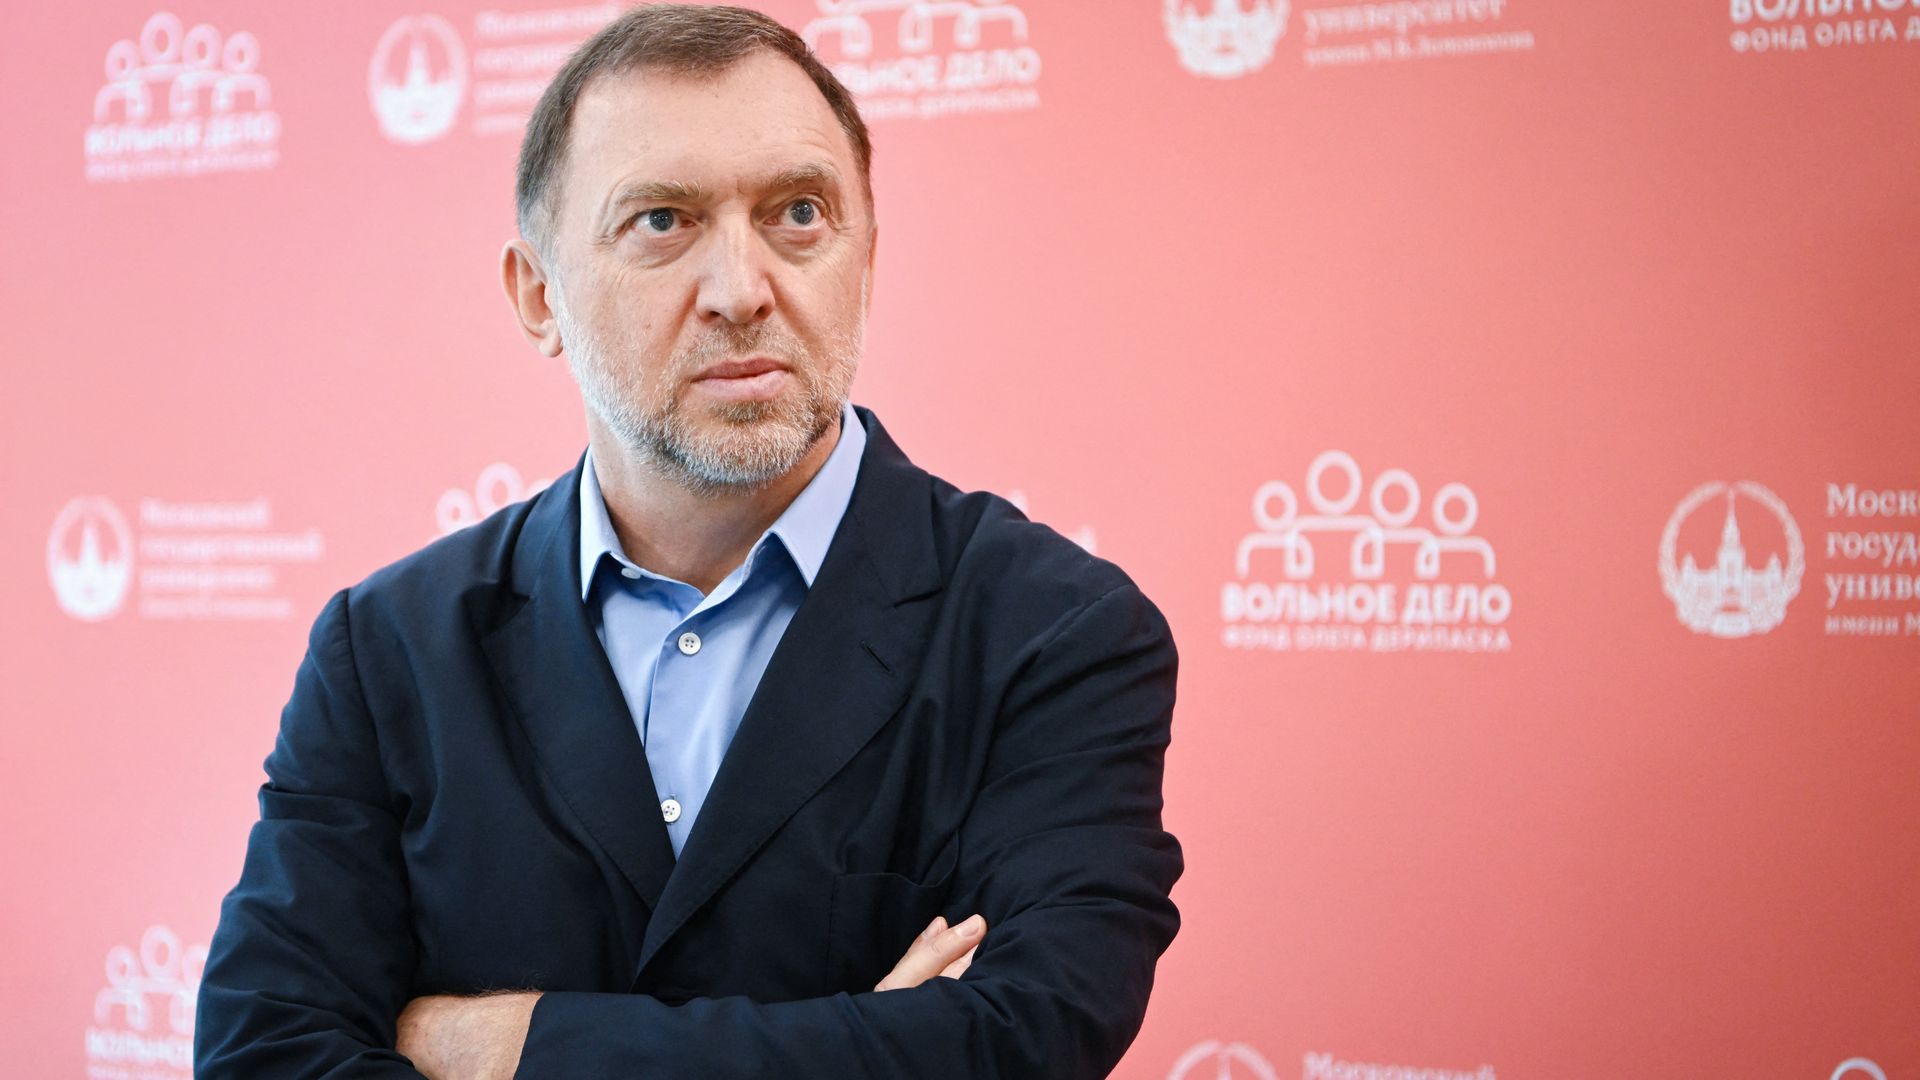 Russian oligarch Oleg Deripaska addresses media representatives during a press conference in Moscow on June 28, 2022